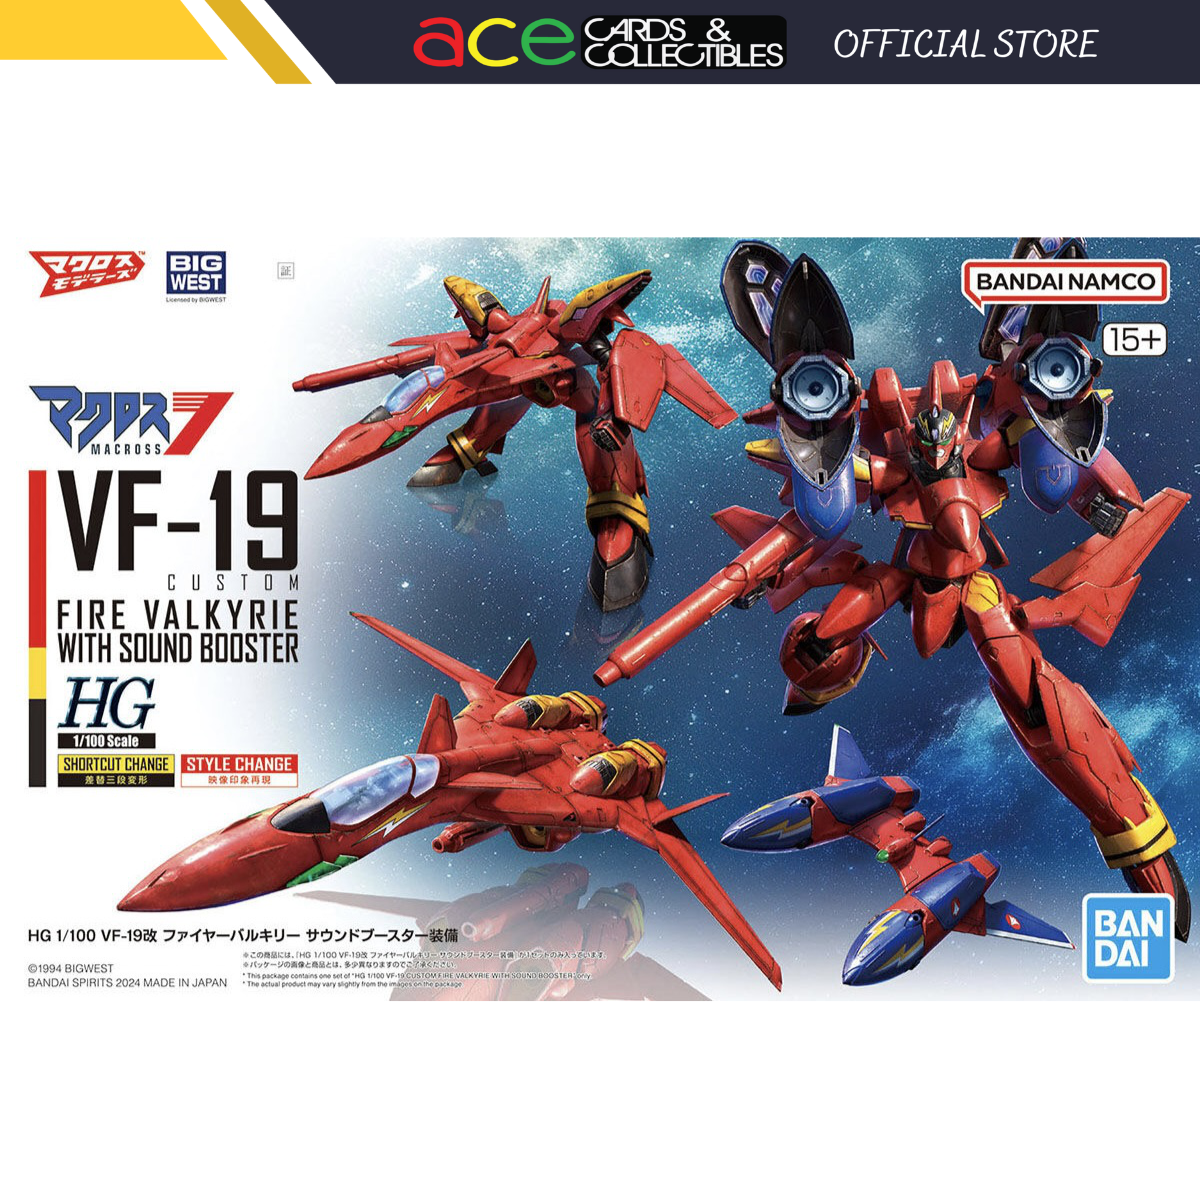 Gunpla HG 1/100 Macross VF-19 Custom Fire Valkyrie With Sound Booster-Bandai-Ace Cards & Collectibles